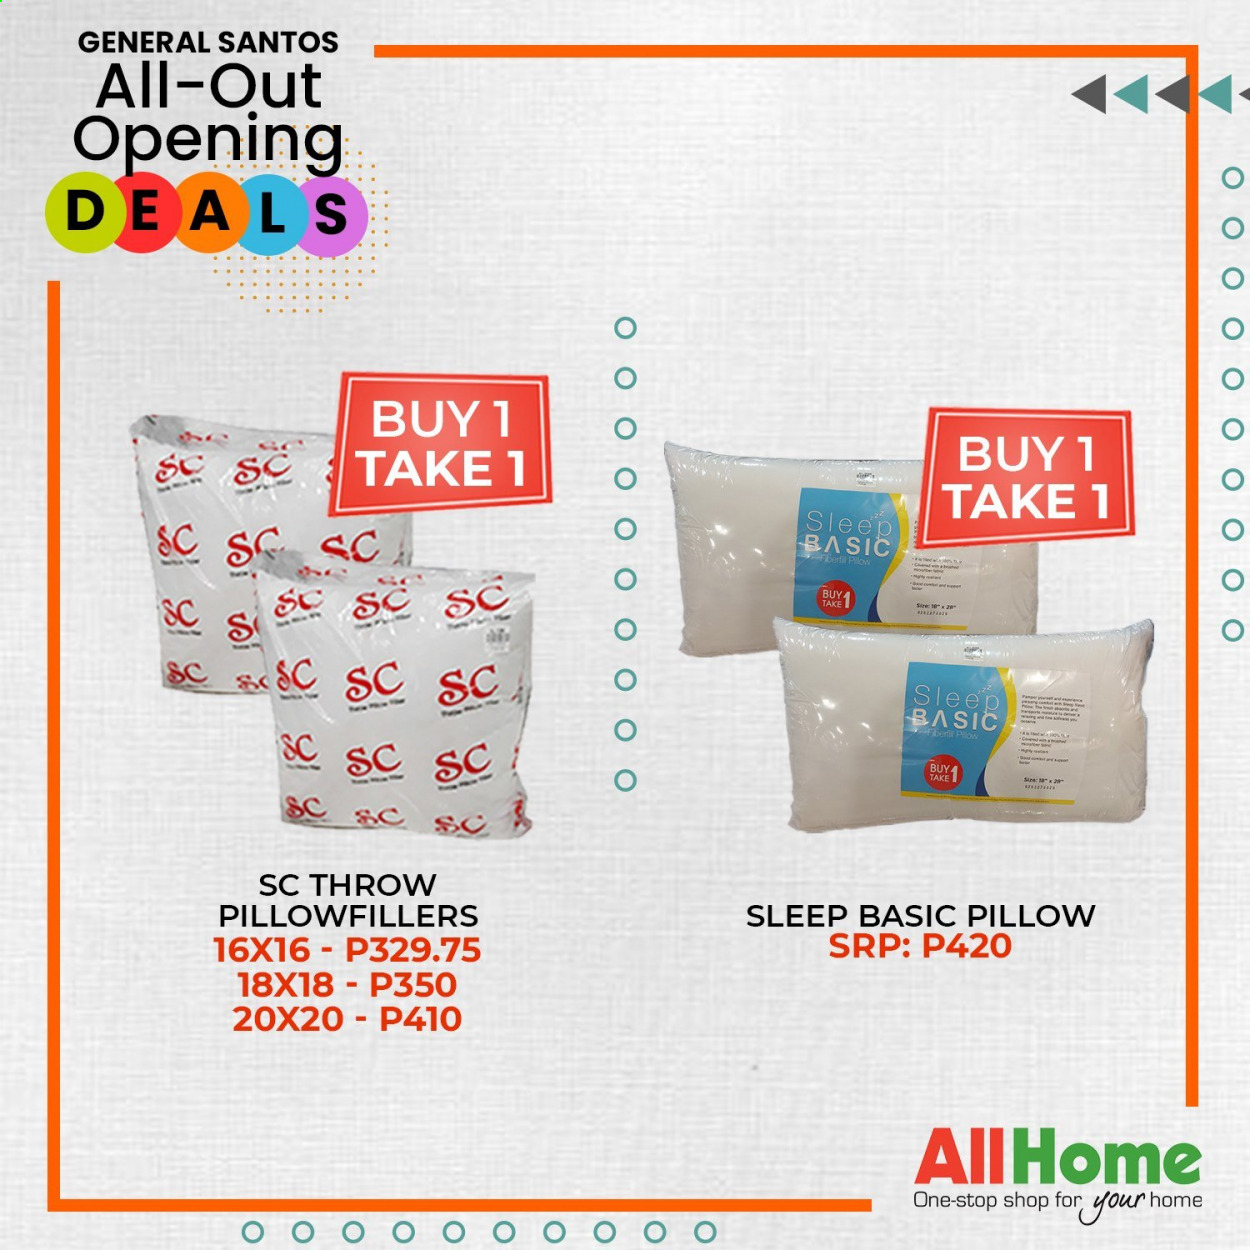 thumbnail - AllHome offer  - 30.1.2021 - 28.2.2021 - Sales products - pillow. Page 2.